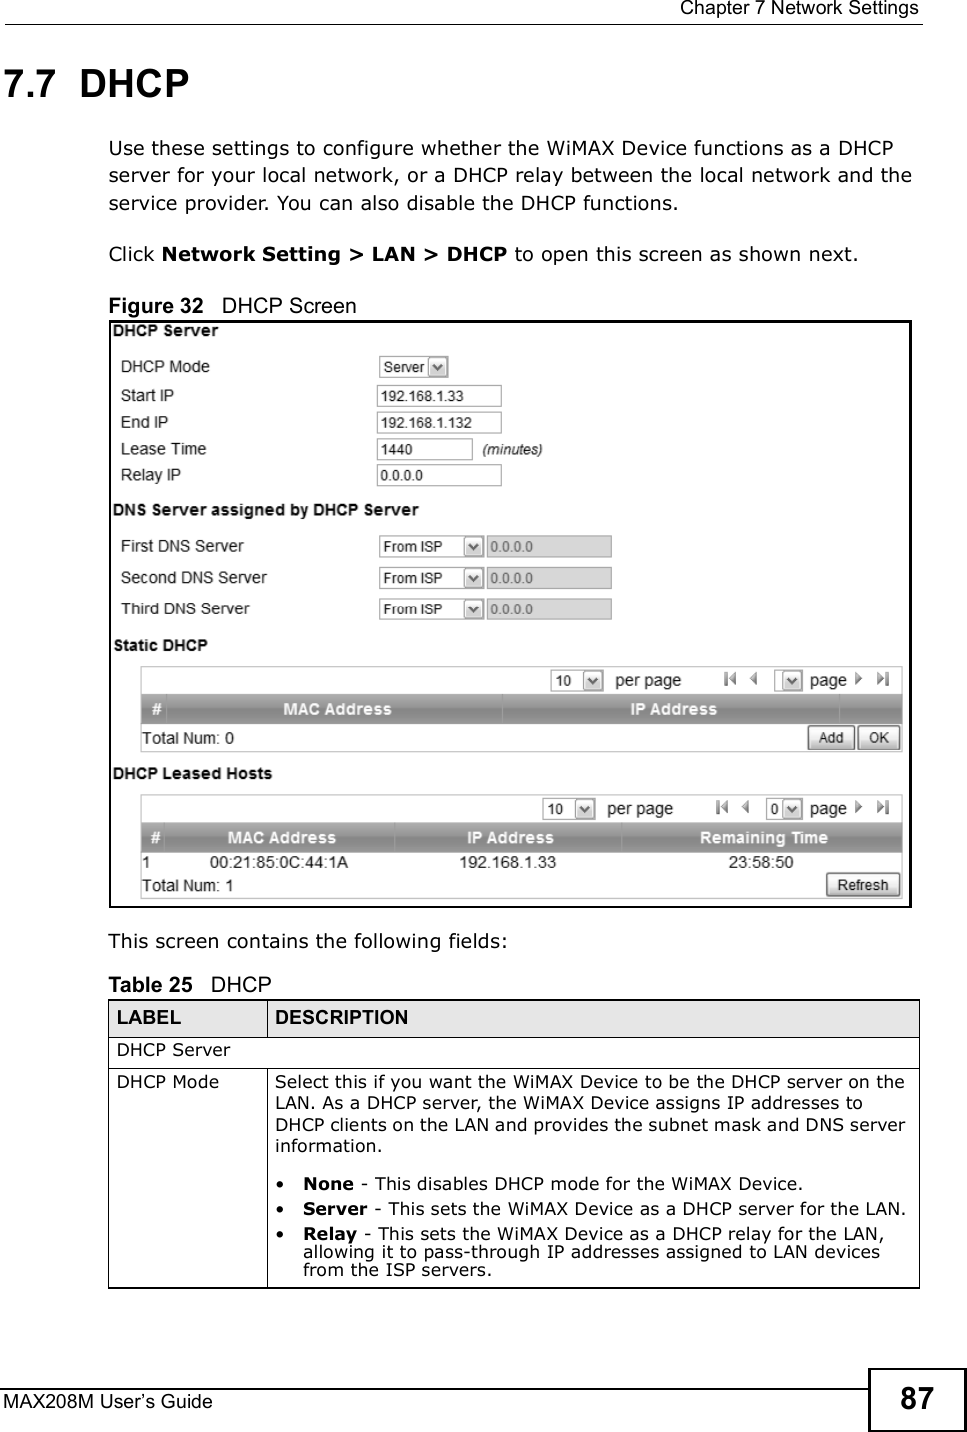  Chapter 7Network SettingsMAX208M User s Guide 877.7  DHCPUse these settings to configure whether the WiMAX Device functions as a DHCP server for your local network, or a DHCP relay between the local network and the service provider. You can also disable the DHCP functions.Click Network Setting &gt; LAN &gt; DHCP to open this screen as shown next.Figure 32   DHCP ScreenThis screen contains the following fields:Table 25   DHCPLABEL DESCRIPTIONDHCP ServerDHCP ModeSelect this if you want the WiMAX Device to be the DHCP server on the LAN. As a DHCP server, the WiMAX Device assigns IP addresses to DHCP clients on the LAN and provides the subnet mask and DNS server information.!None - This disables DHCP mode for the WiMAX Device.!Server - This sets the WiMAX Device as a DHCP server for the LAN.!Relay - This sets the WiMAX Device as a DHCP relay for the LAN, allowing it to pass-through IP addresses assigned to LAN devices from the ISP servers.